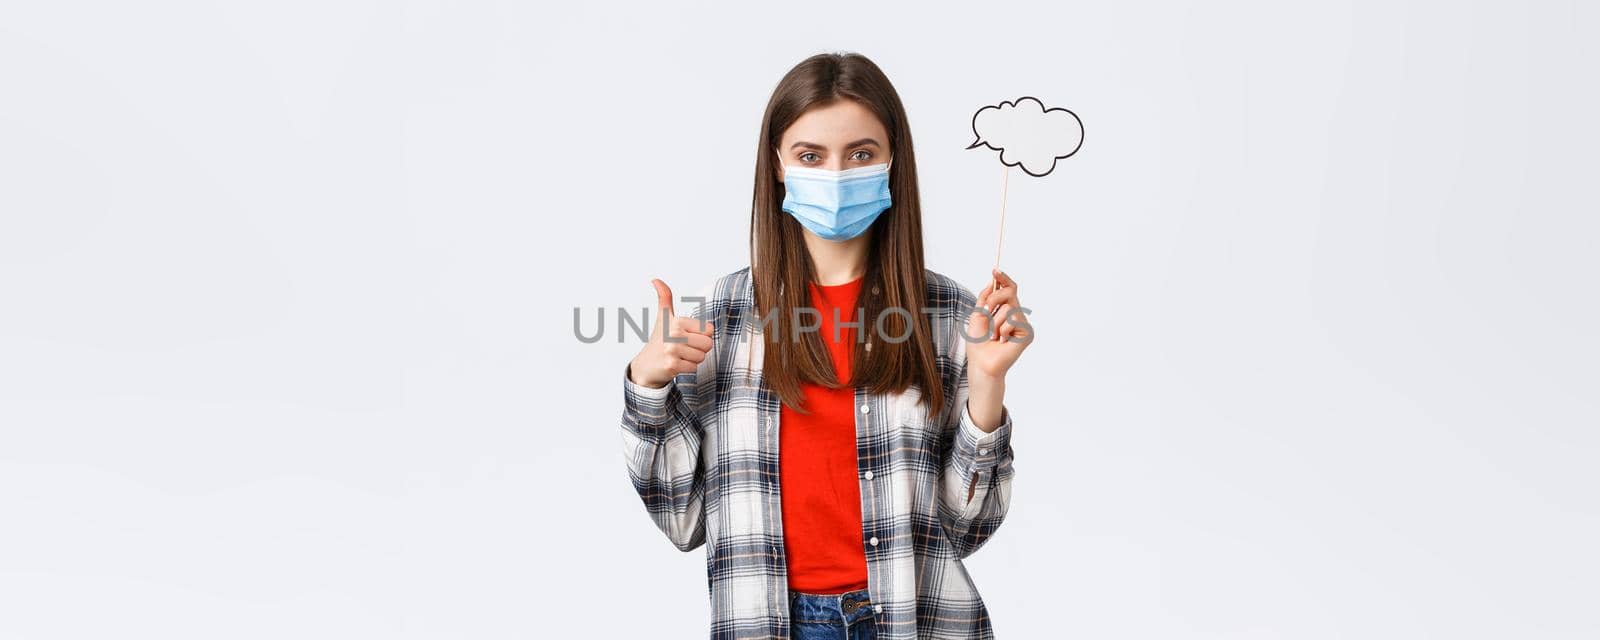 Coronavirus outbreak, leisure on quarantine, social distancing and emotions concept. Pleased young determined girl in medical mask thumb-up, hold bubble commend cloud on stick.